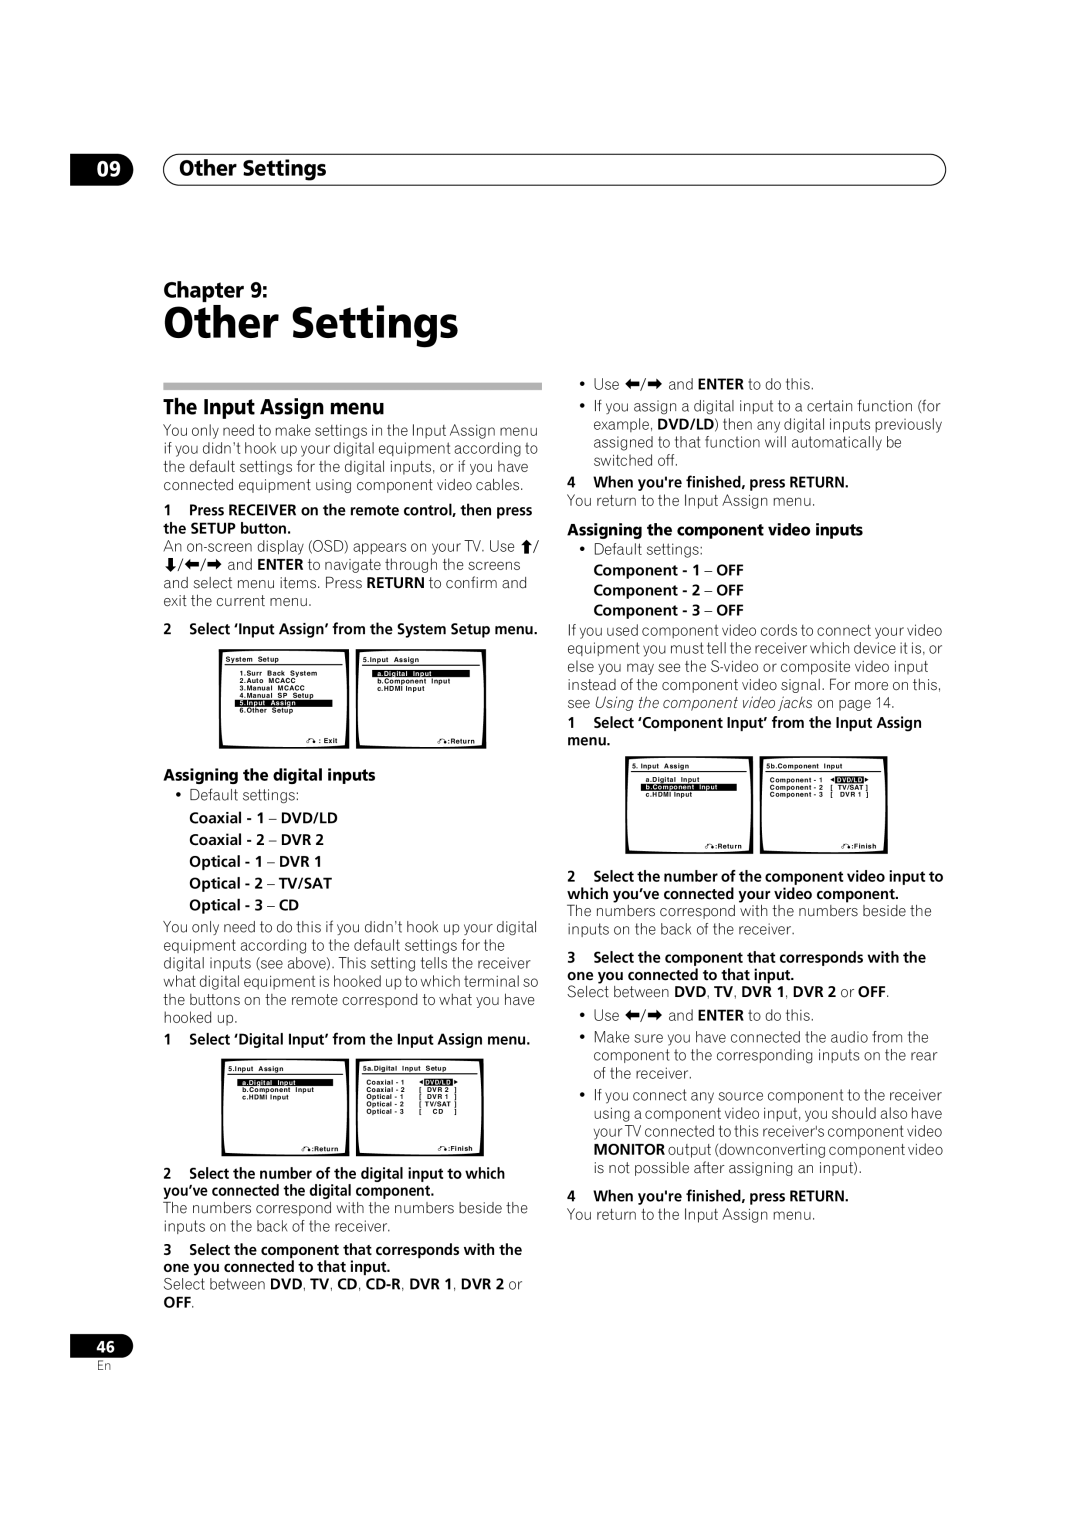 Pioneer VSX-1016TXV-K 09Other Settings Chapter, The Input Assign menu, Assigning the digital inputs 